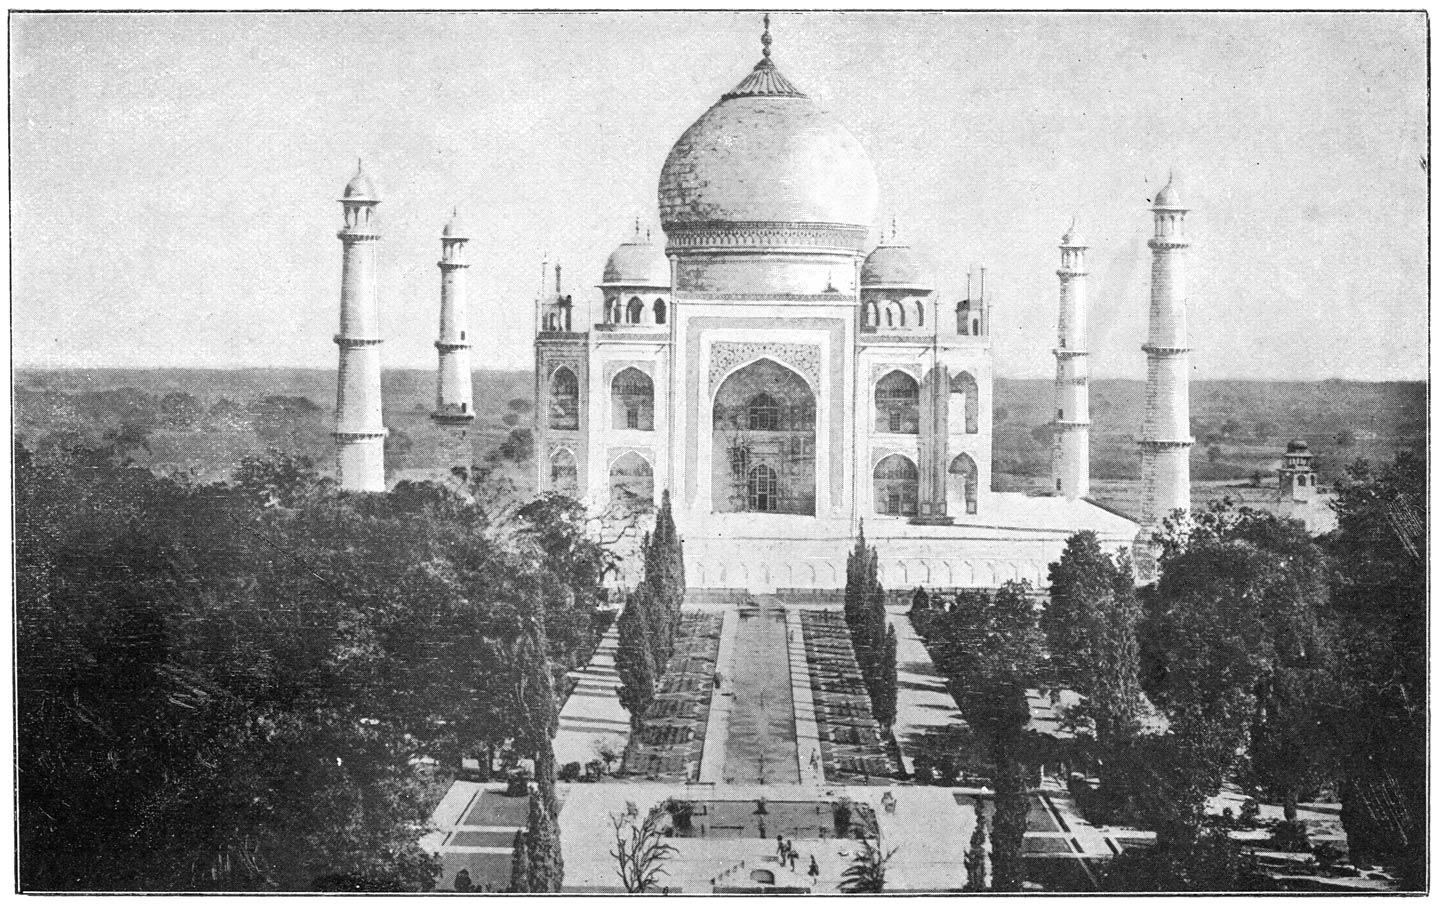 Tadsch Mahal in Agra.